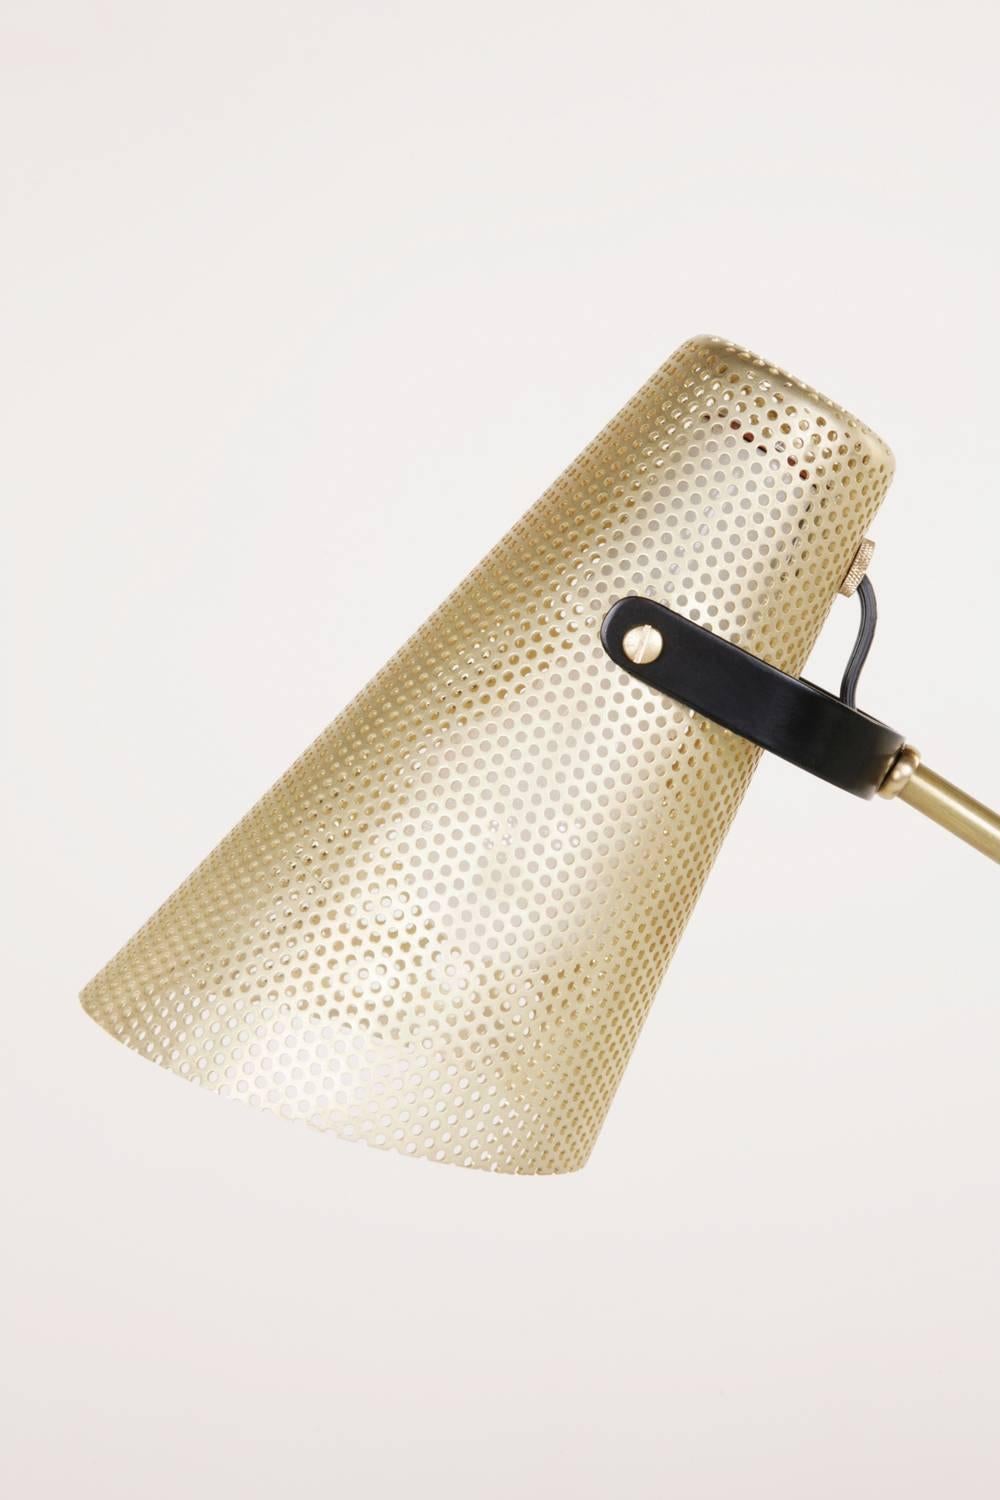 perforated brass lamp